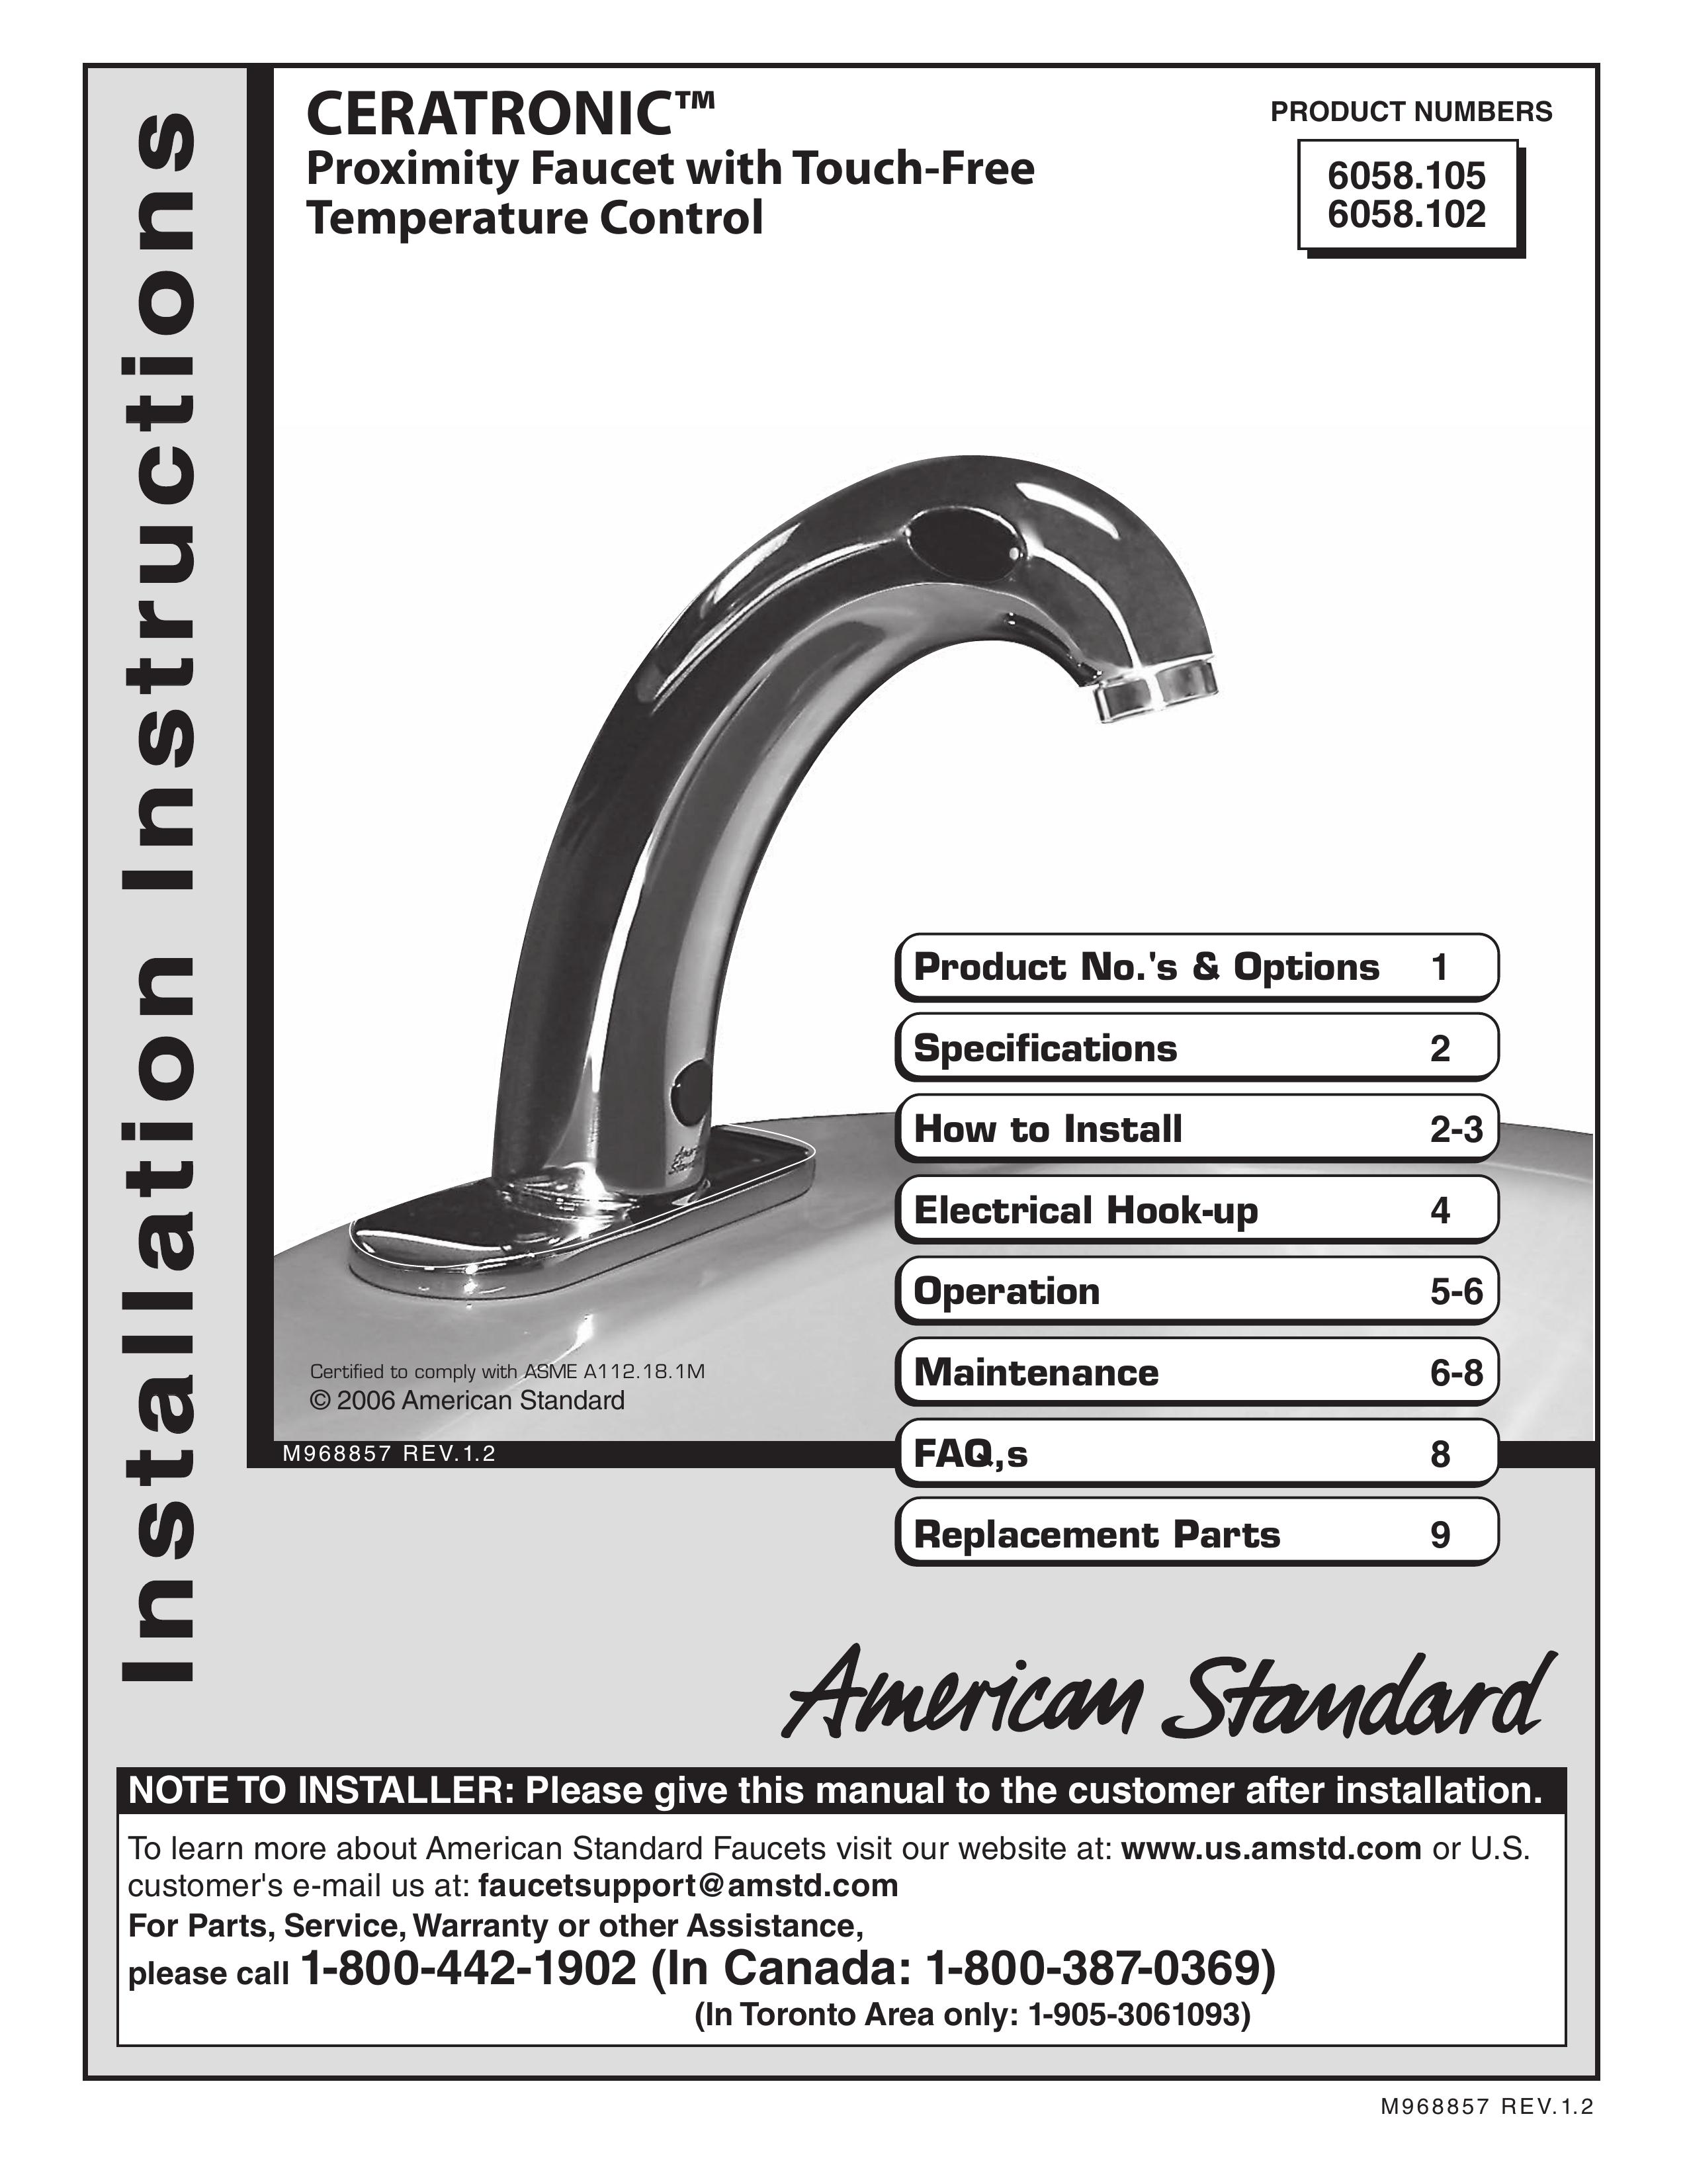 American Standard CERATRONIC Proximity Faucet with Touch-Free Temperature Control Outdoor Kitchen Island User Manual